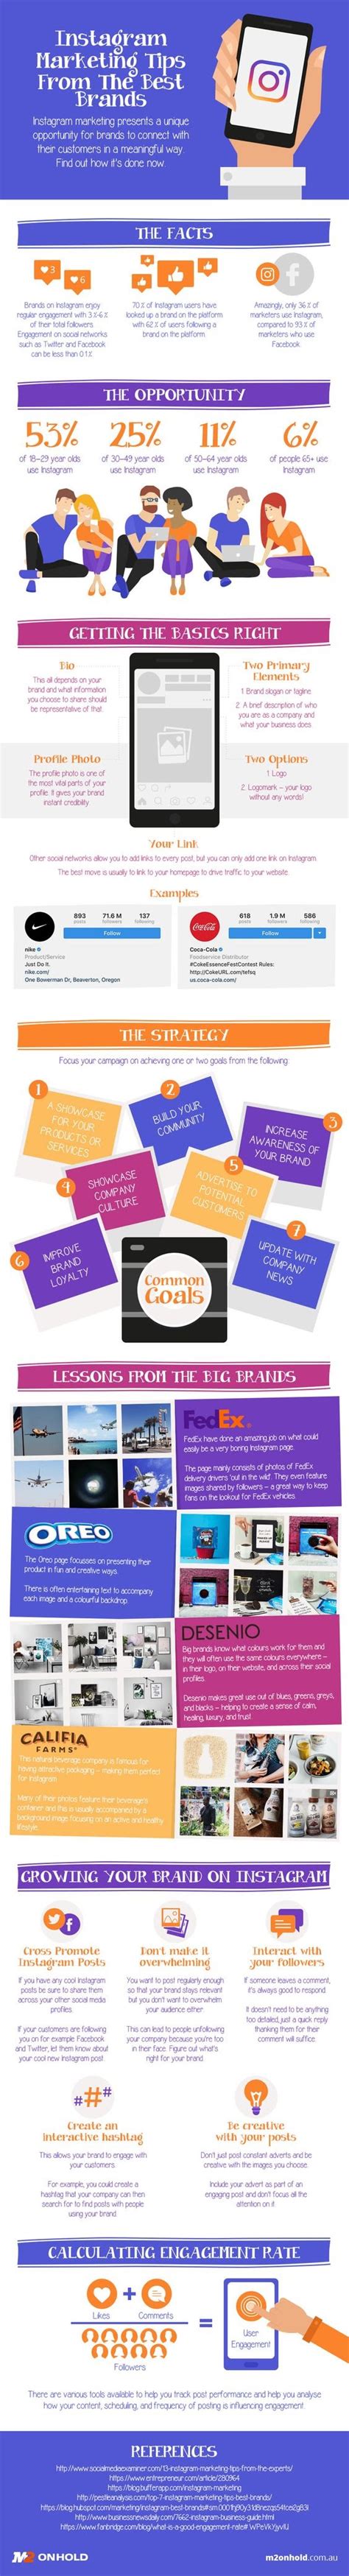 Instagram Marketing Tips From The Best Brands Infographic